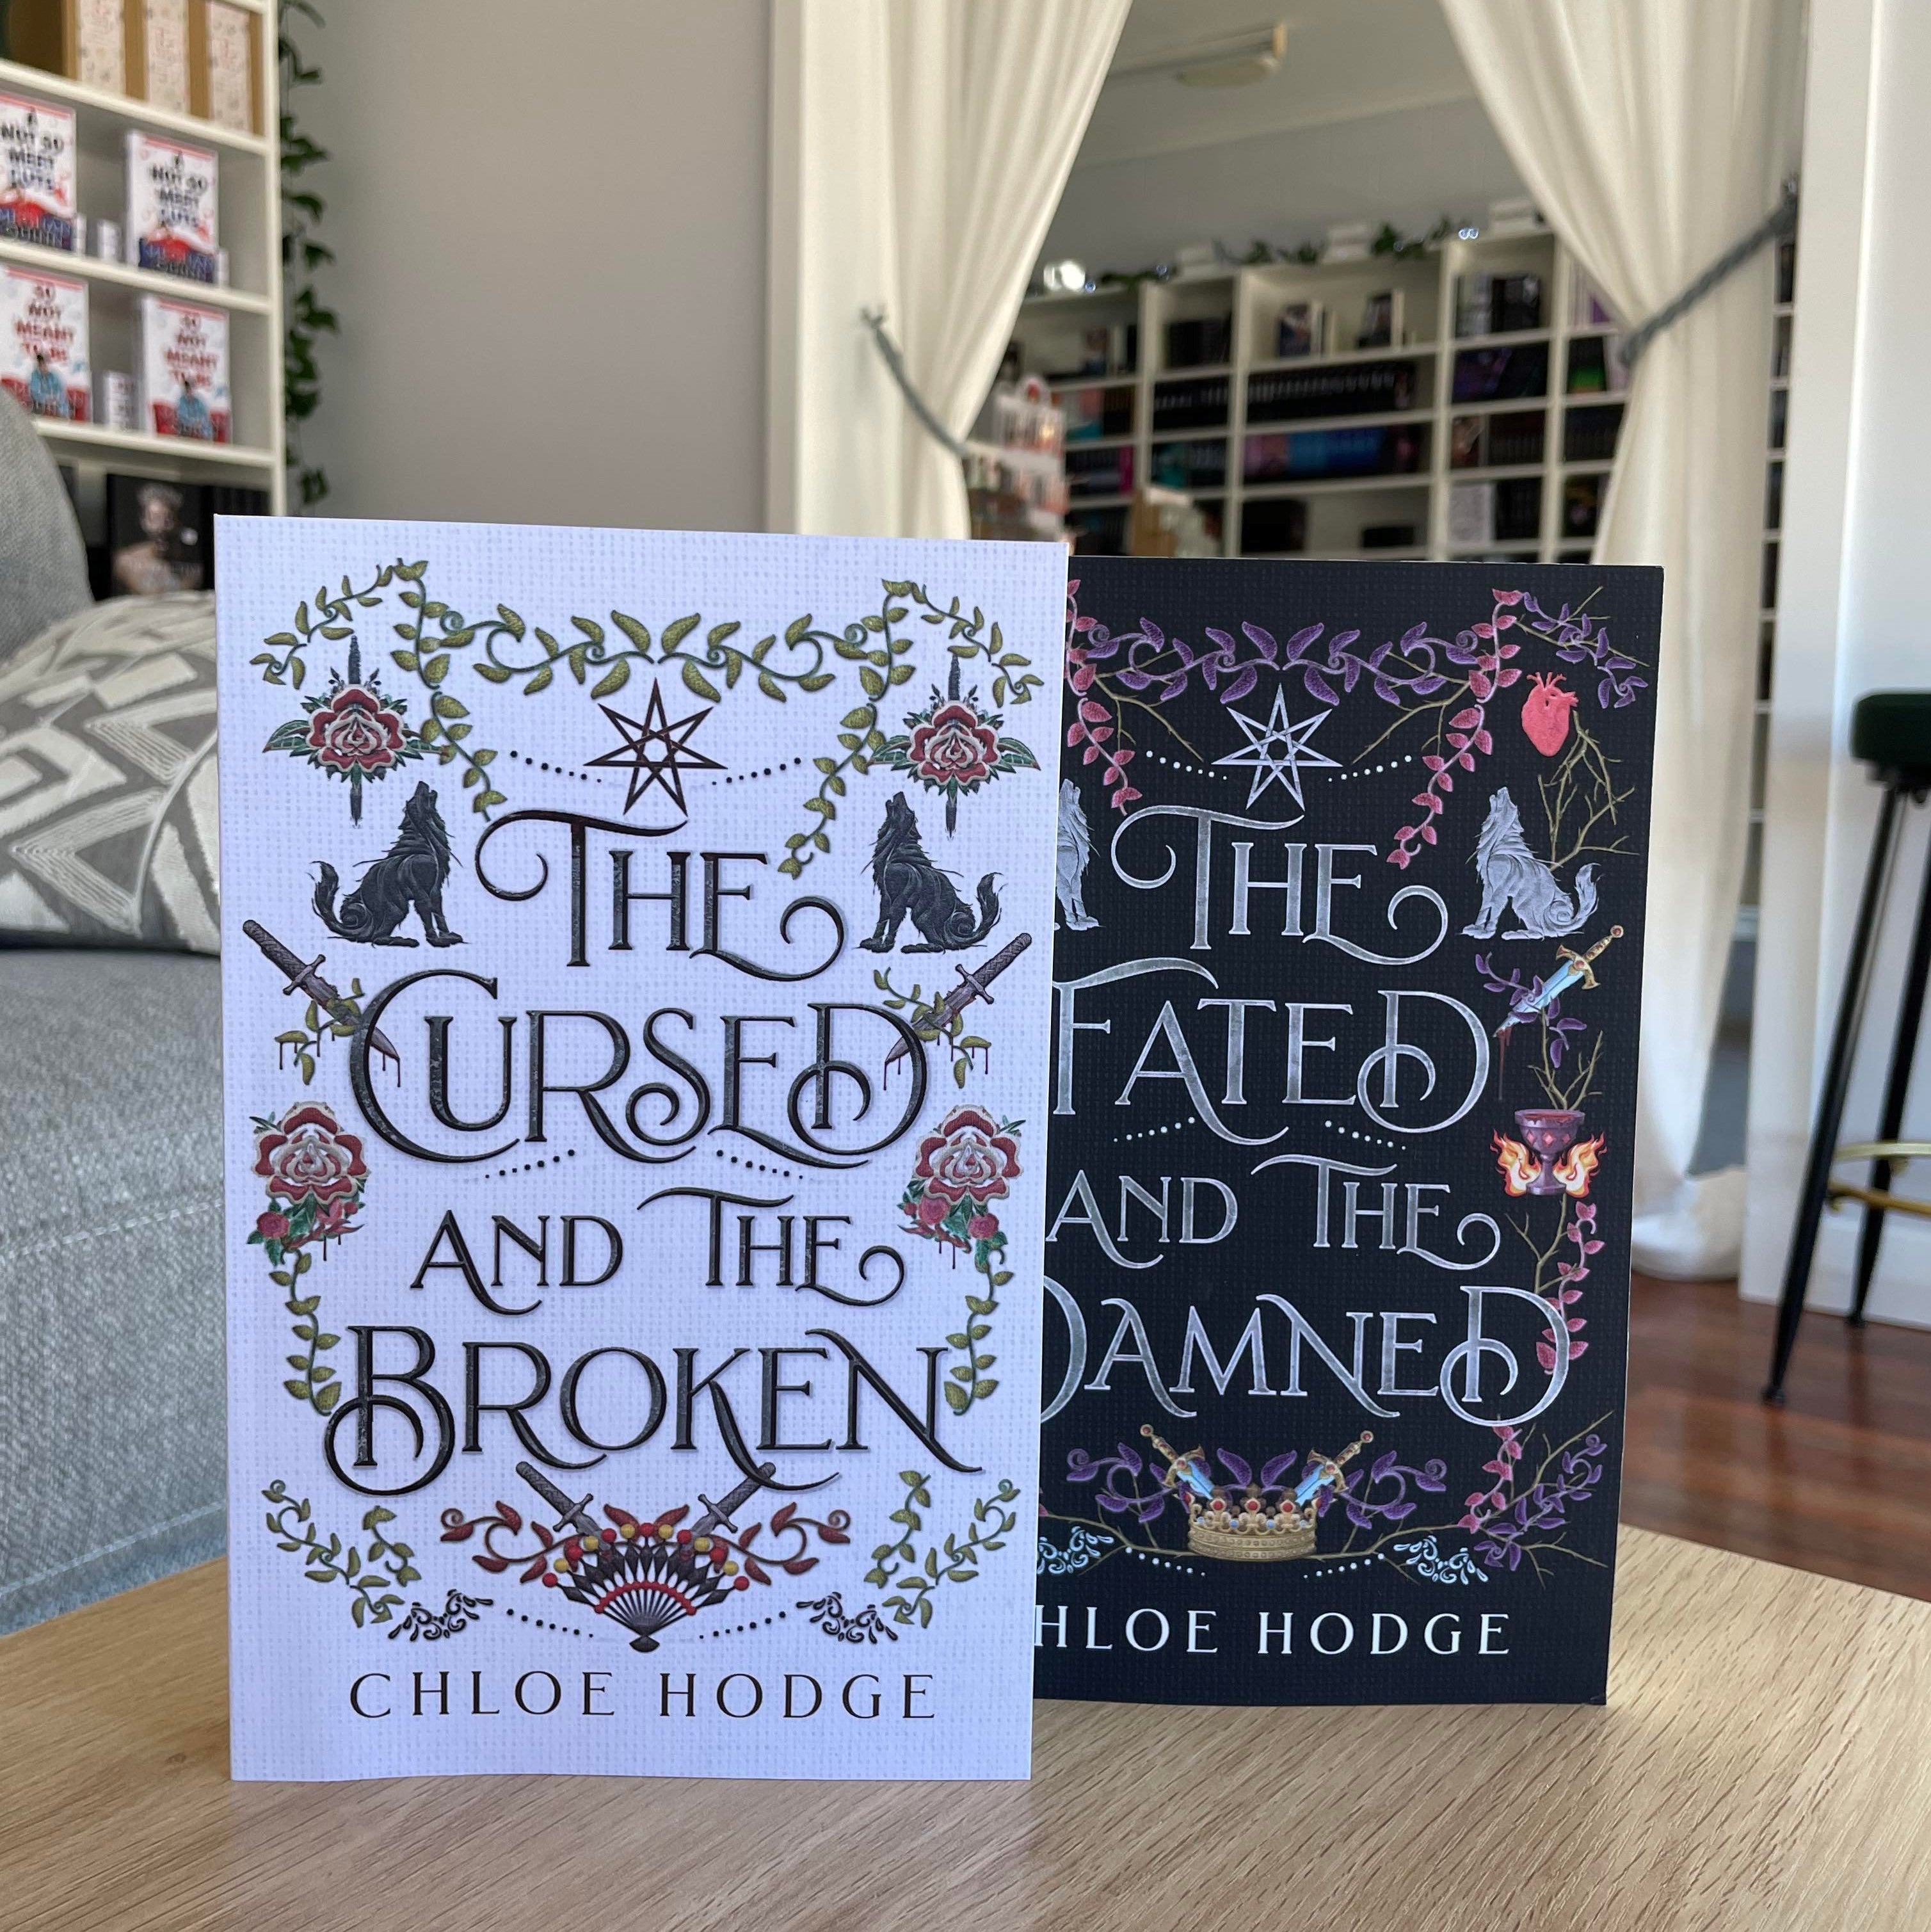 The Cursed Blood series by Chloe Hodge